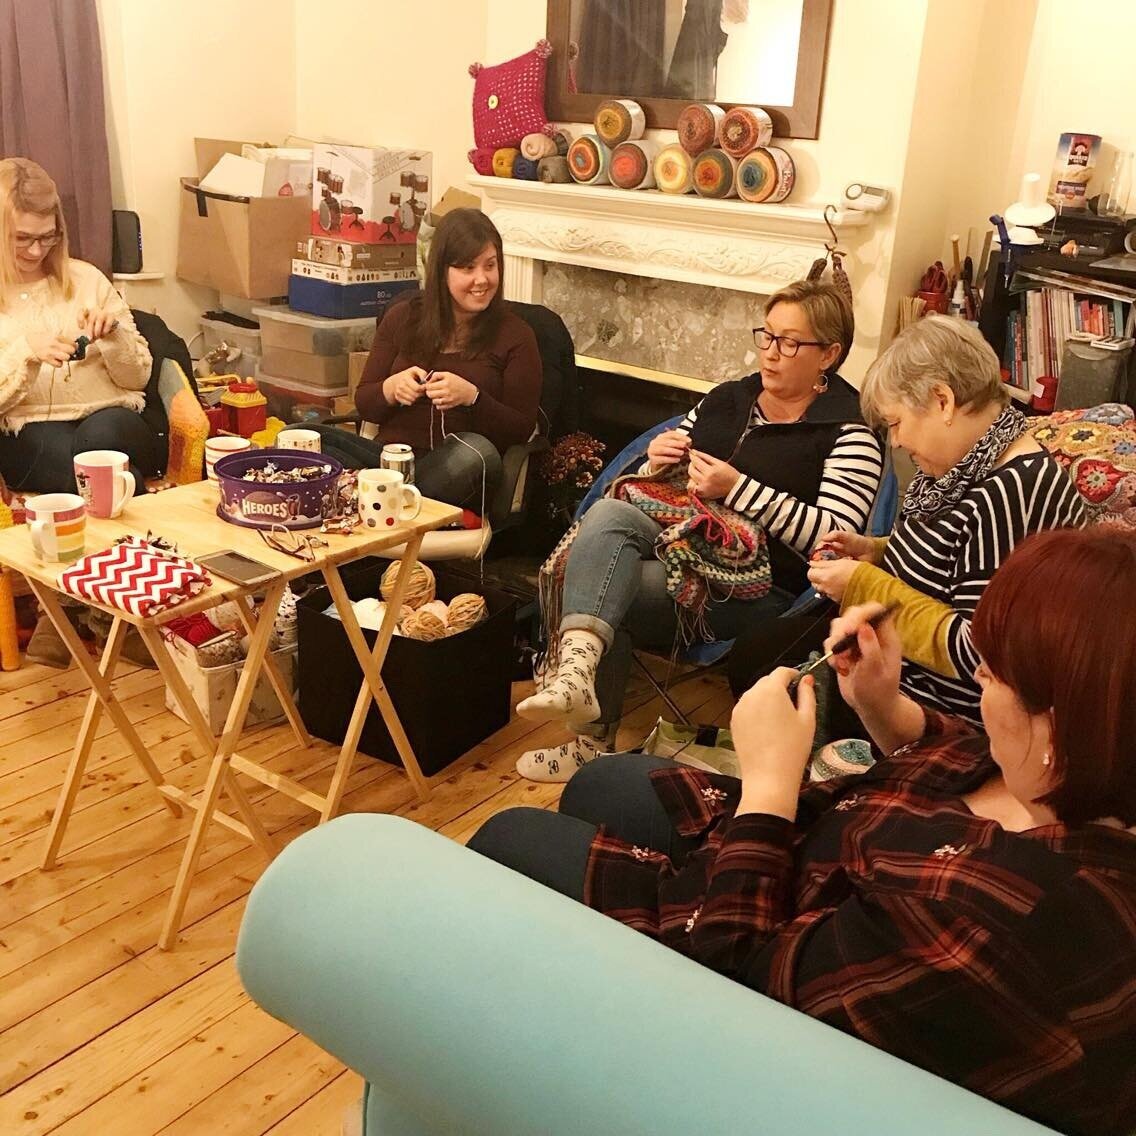 Where it all began - Louisa’s first crochet class in her old living room